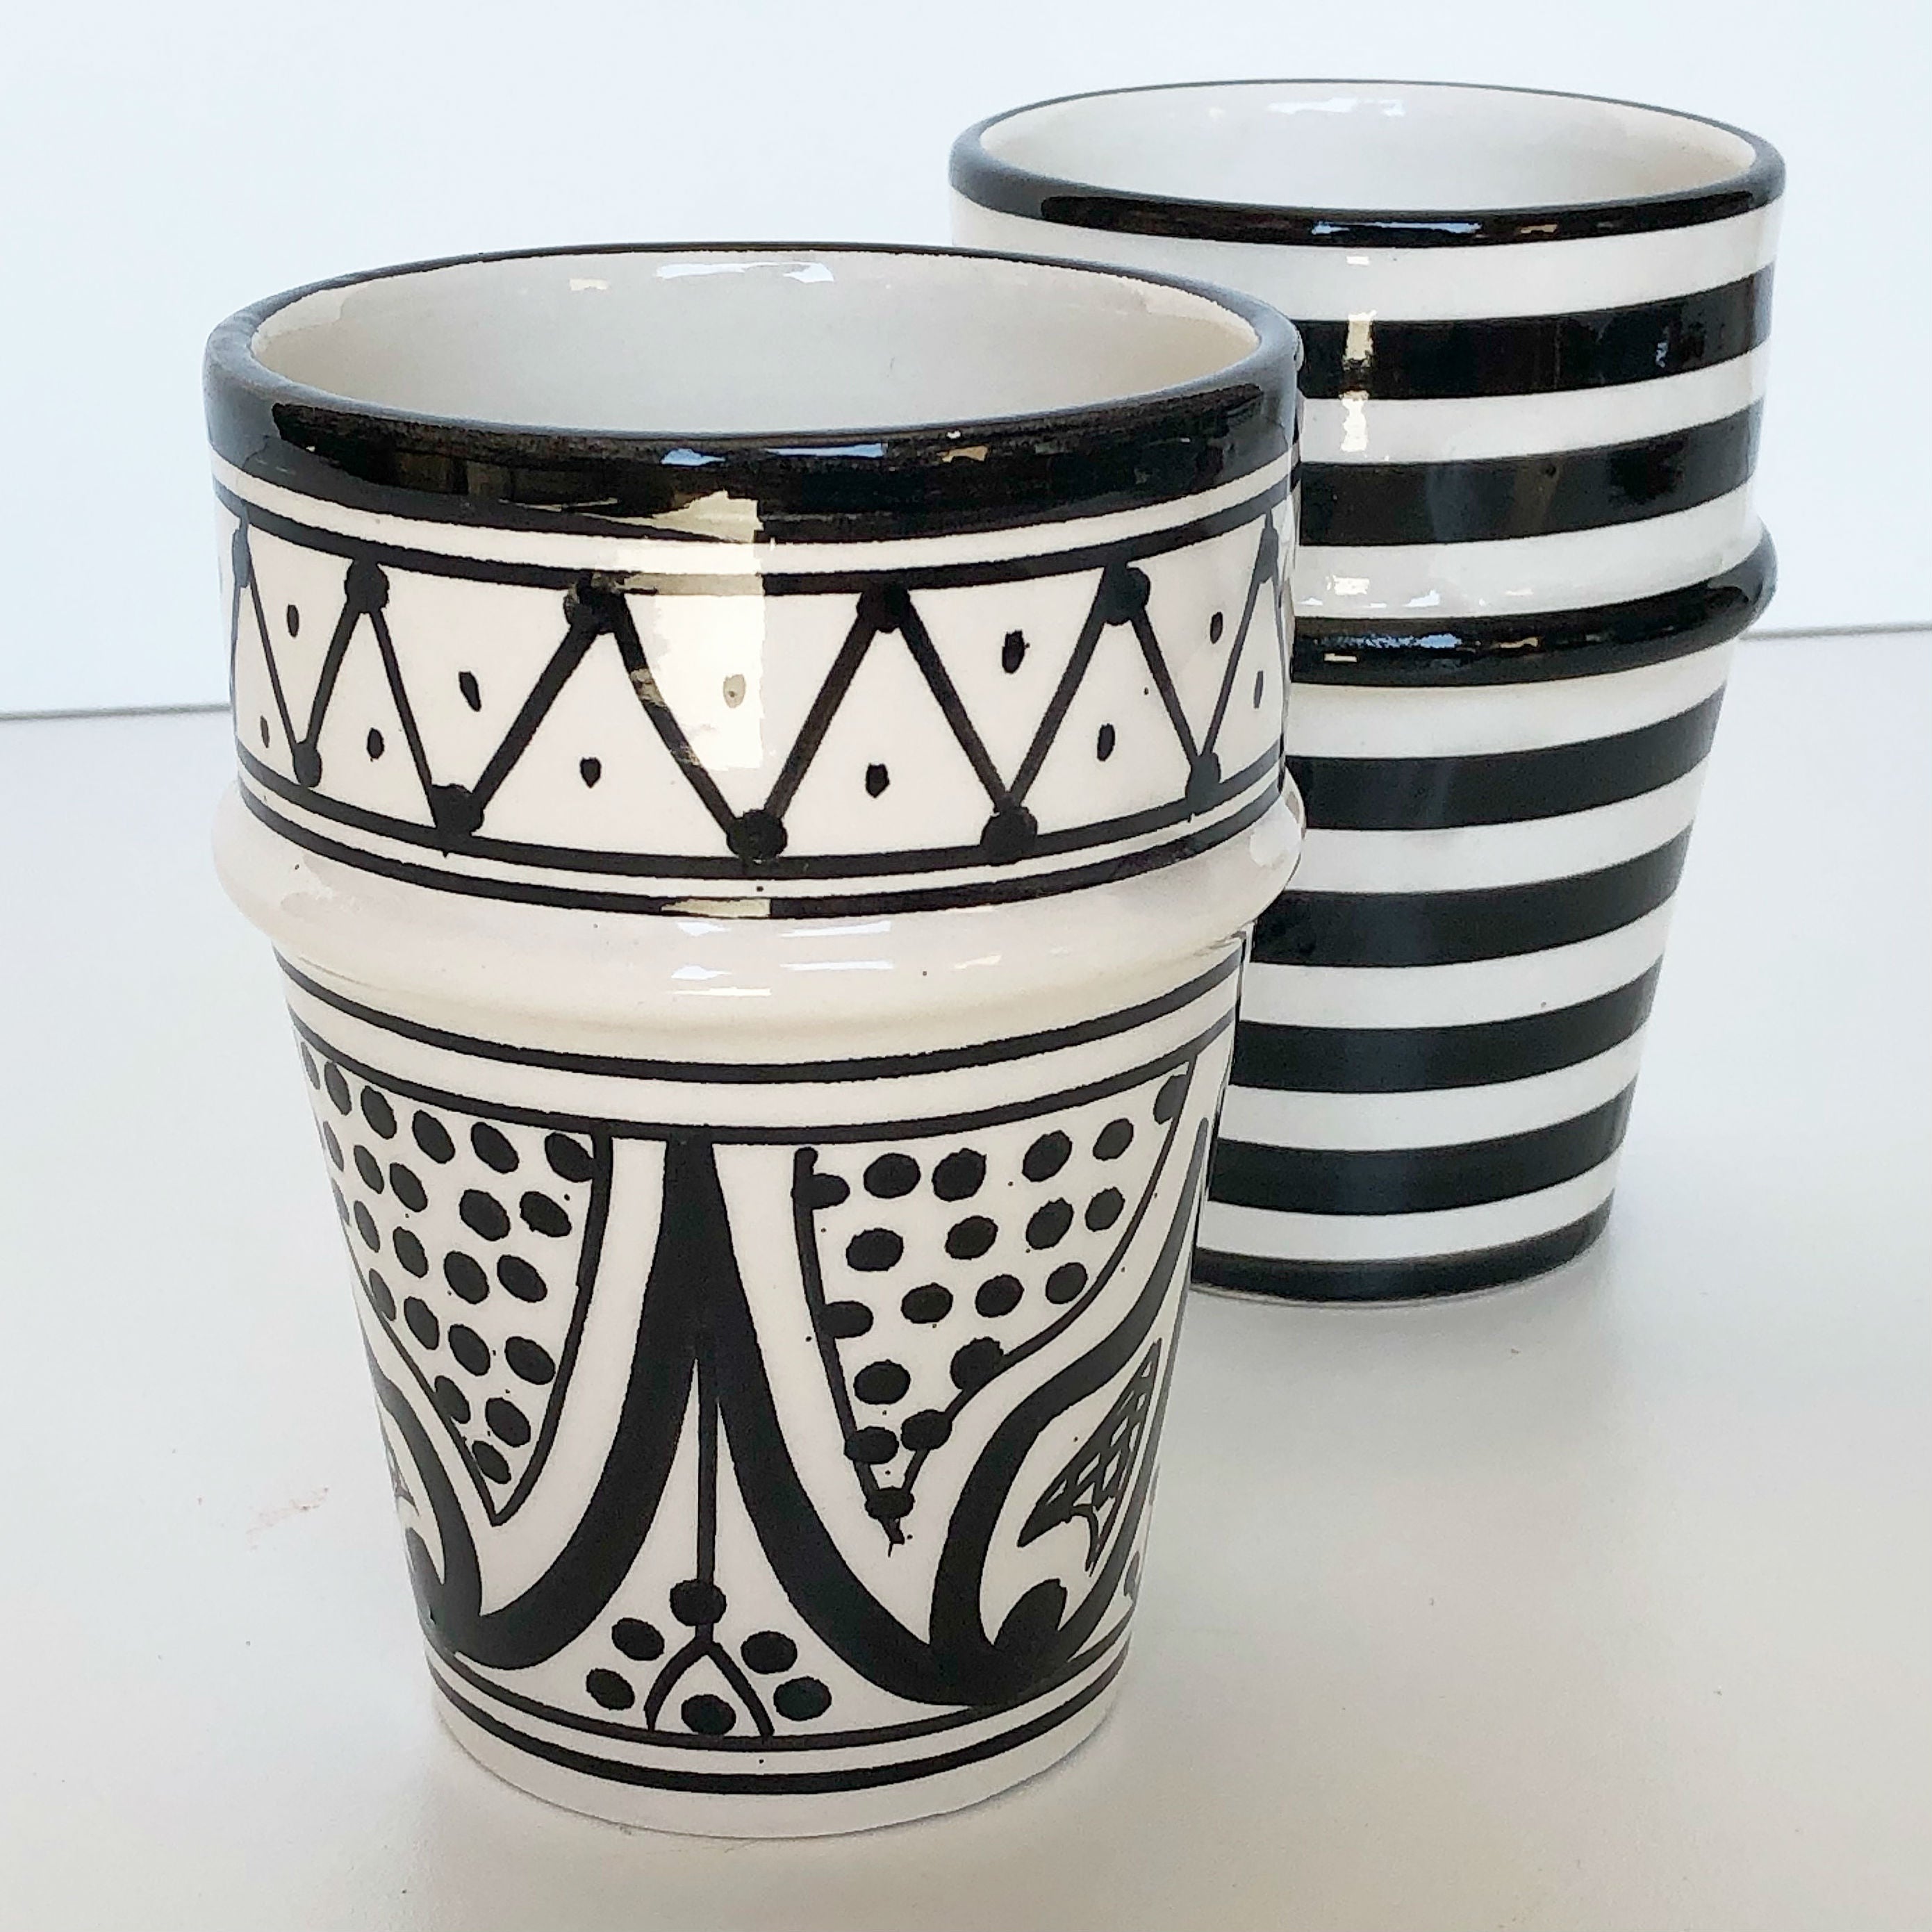 SAFI BELL & DEE cups set of 2 BLACK